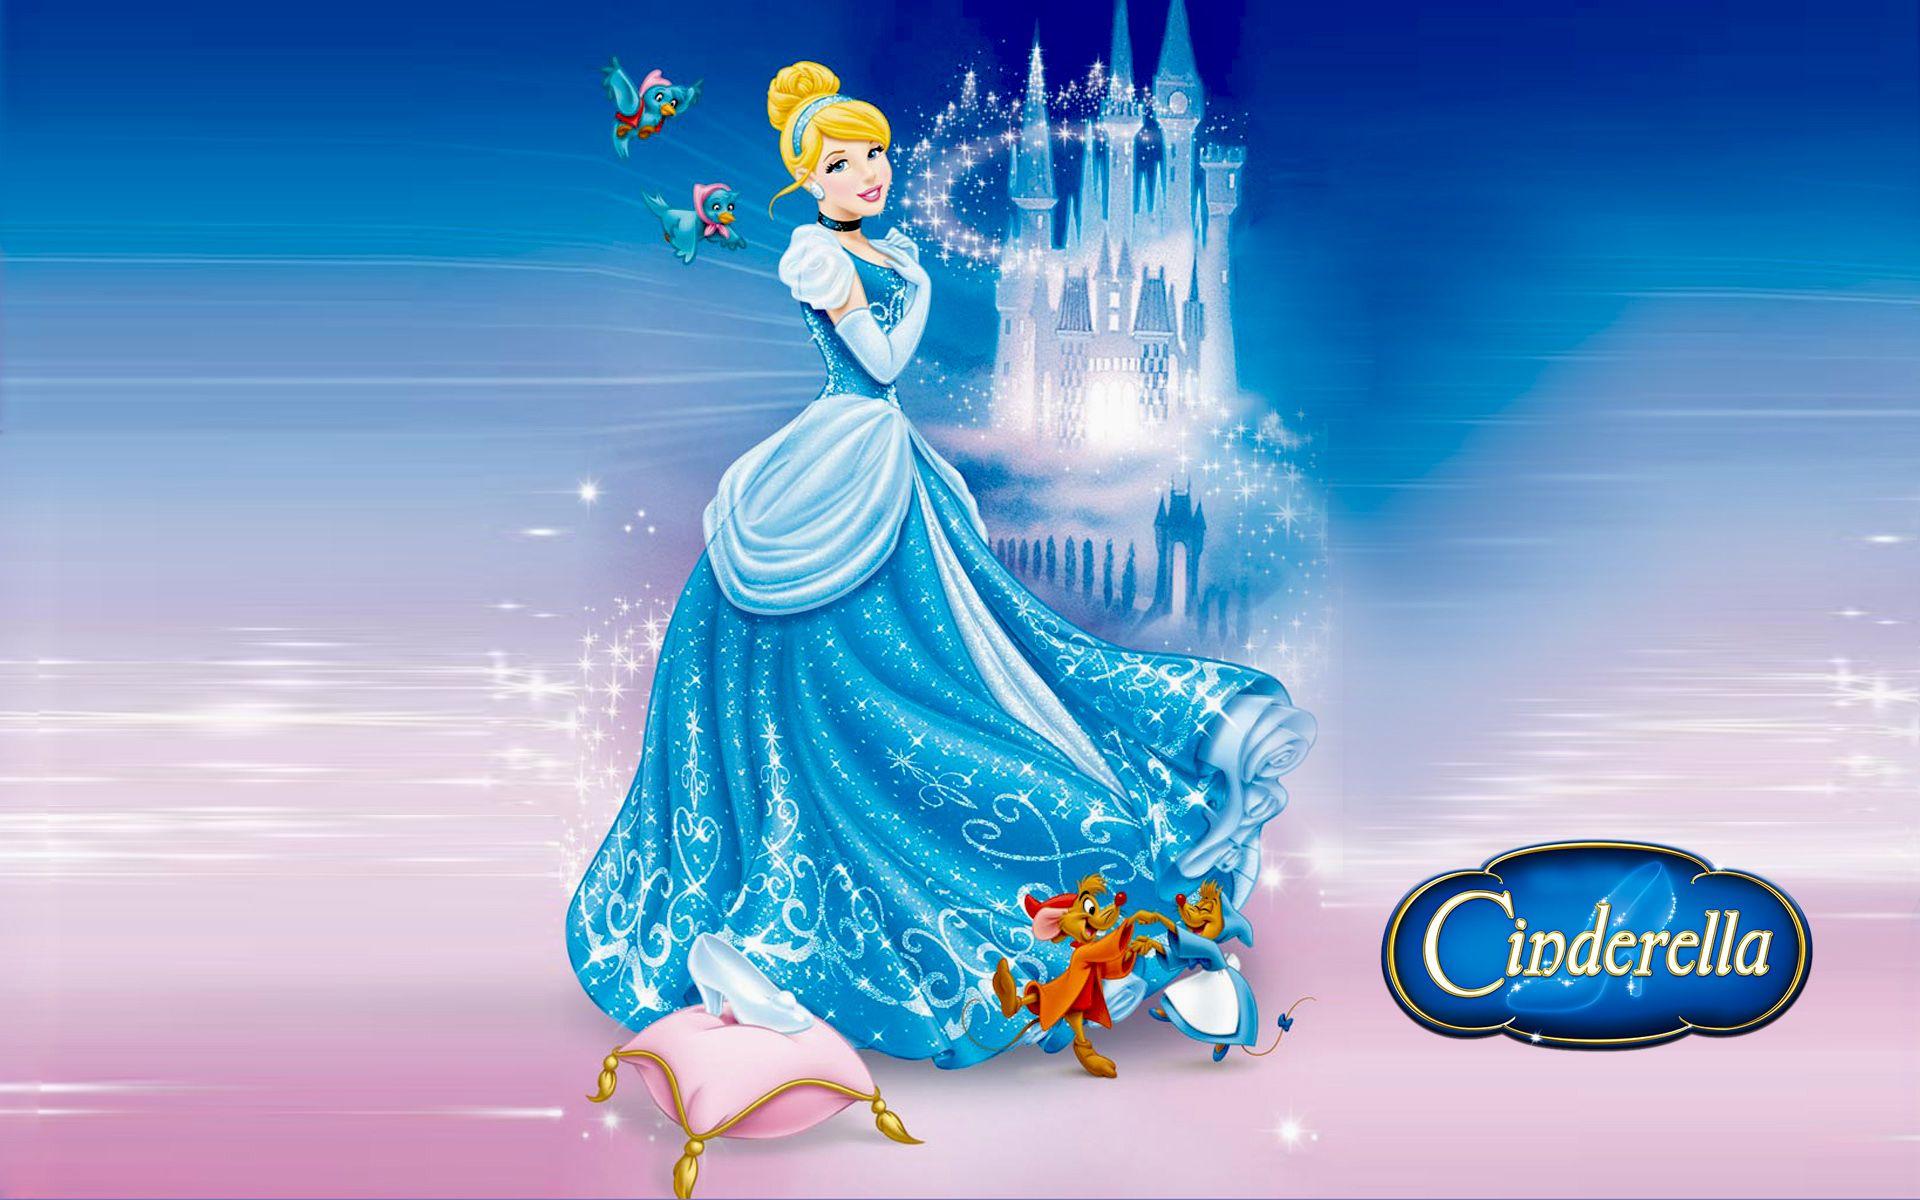 Castle of Cinderella and friends Jaq and Perla Cartoons Picture